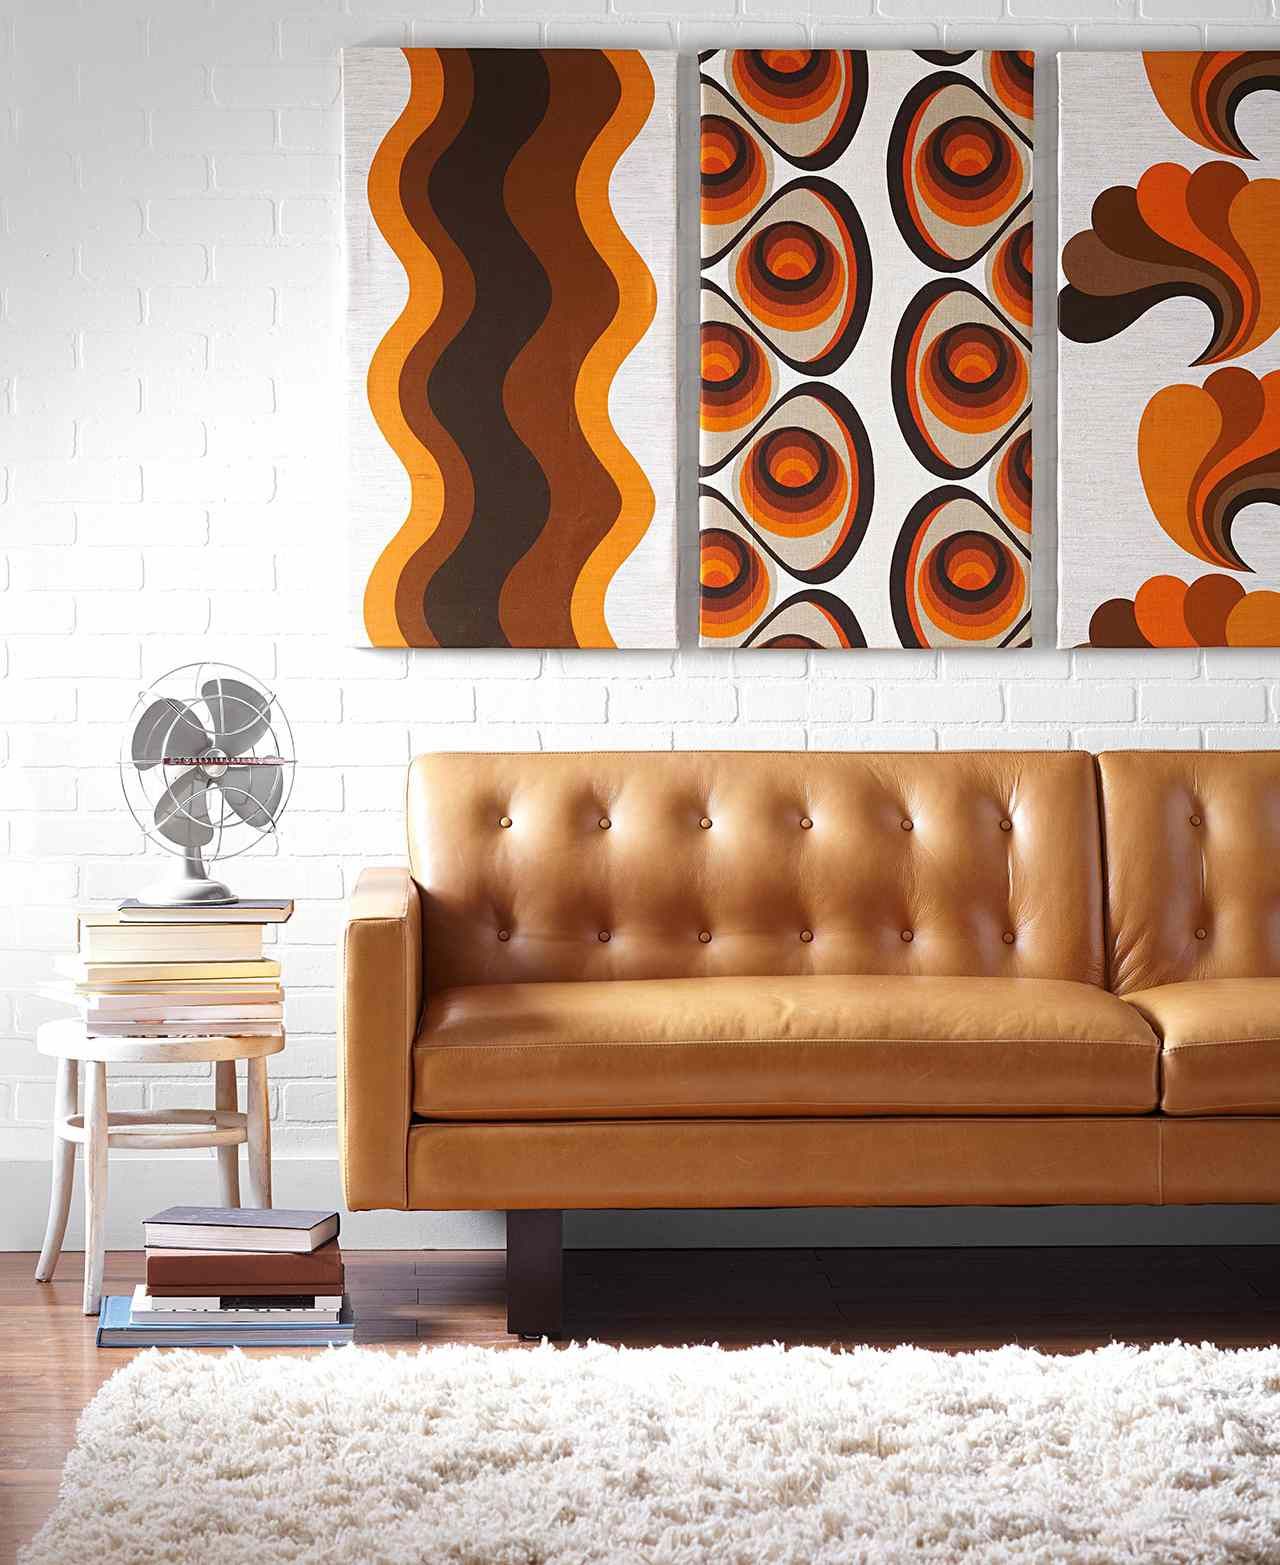 70s Design Is Back: Here Are 5 Ways To Make The Retro Style Feel Fresh Regarding Most Up To Date 70s Retro Wall Art (View 15 of 20)